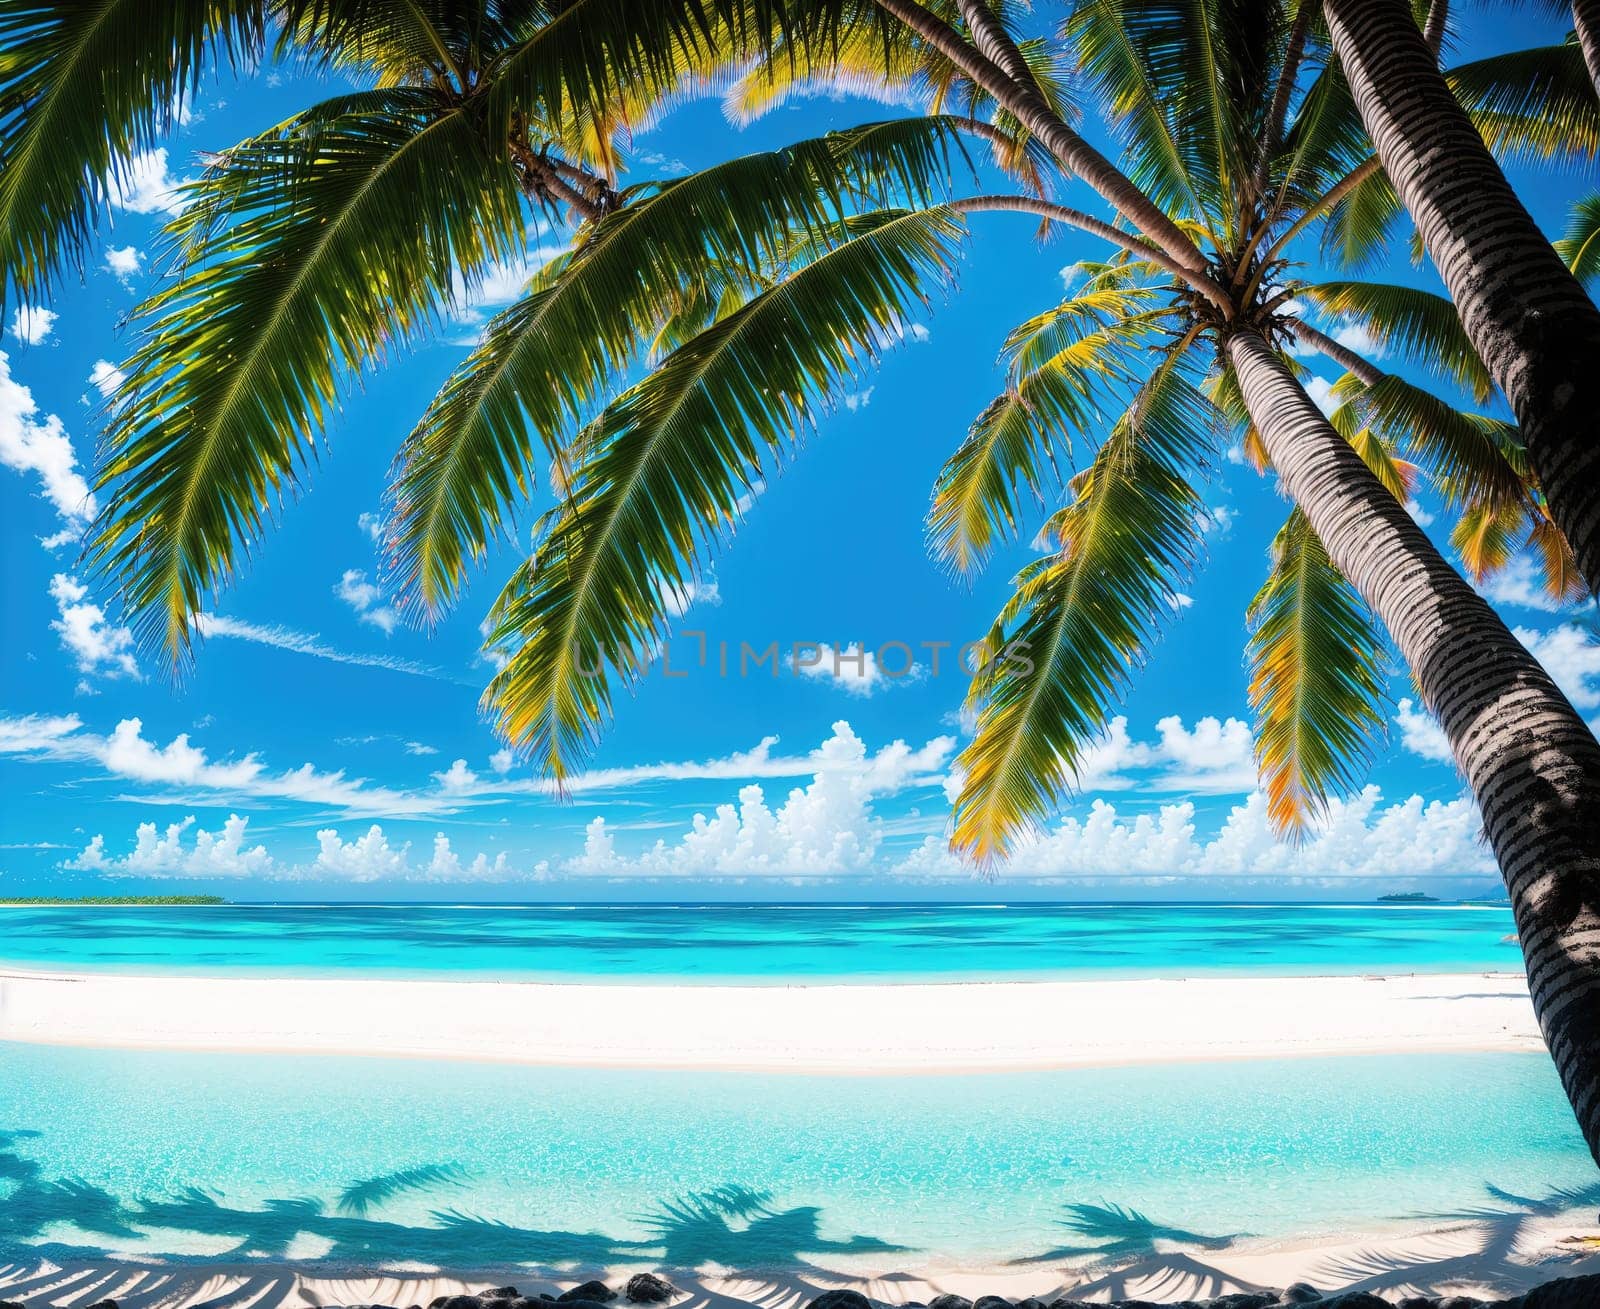 A beach with palm trees and a clear blue ocean in the background. by creart